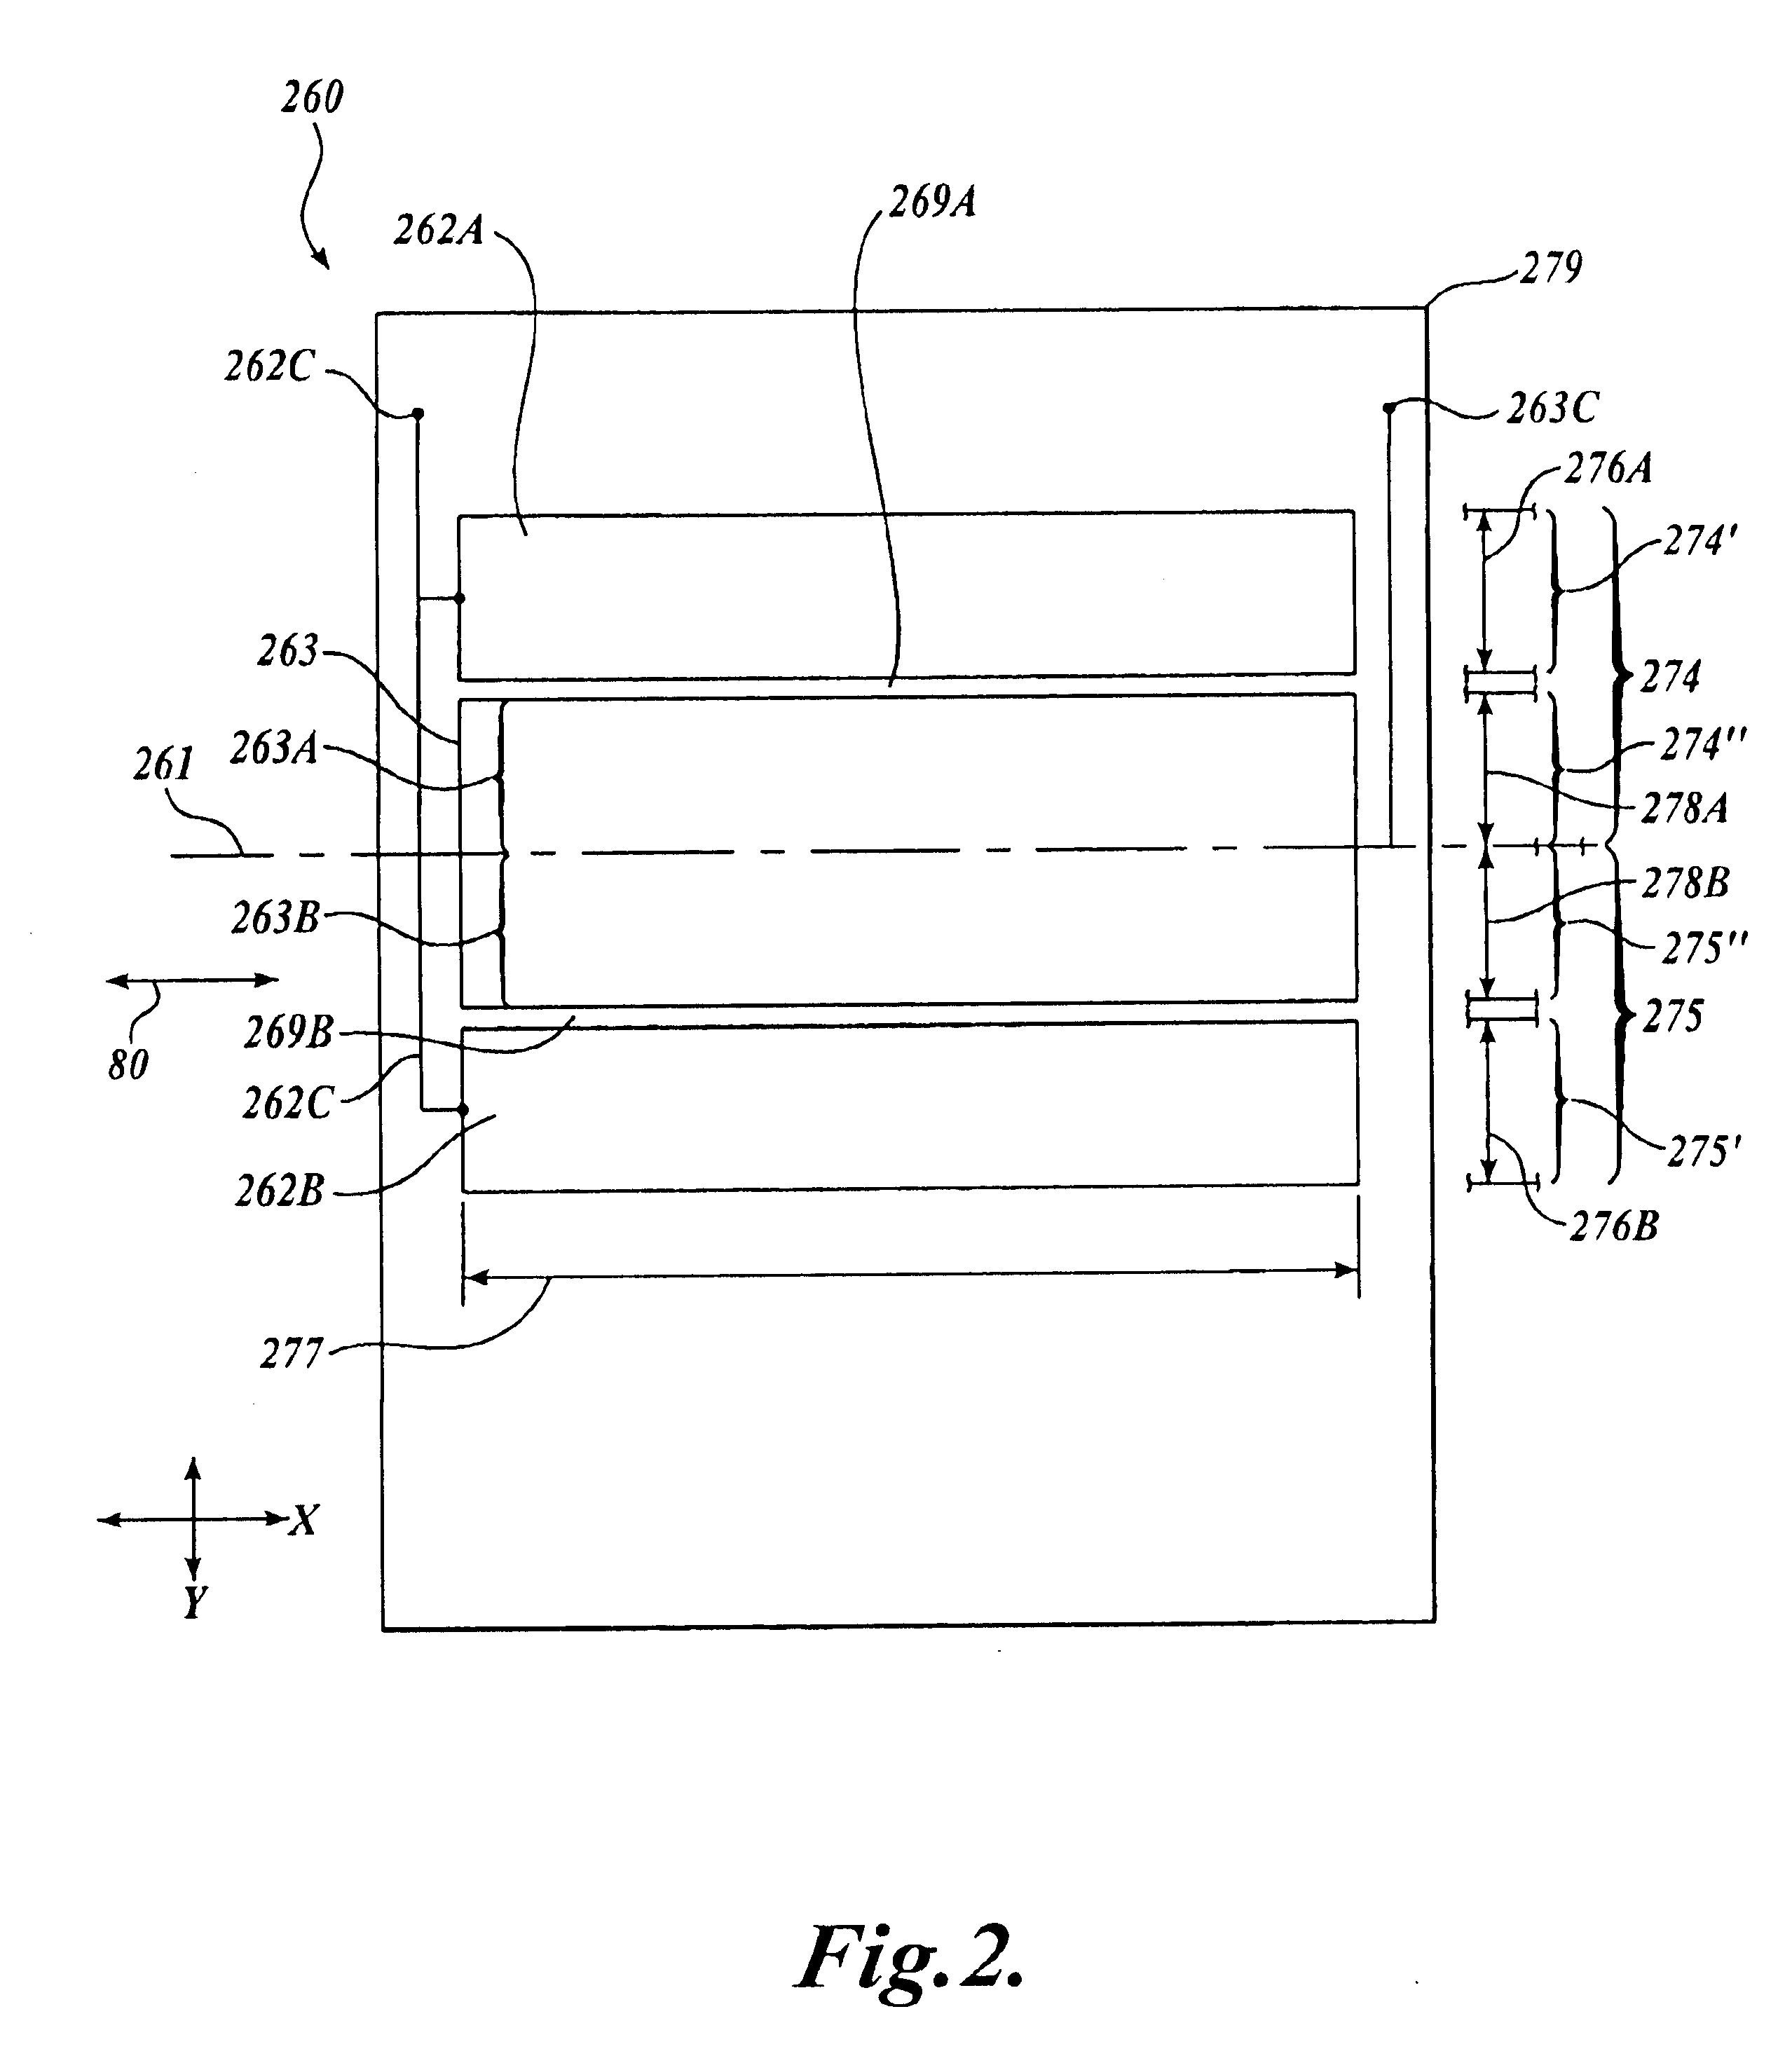 Single-balanced shield electrode configuration for use in capacitive displacement sensing systems and methods